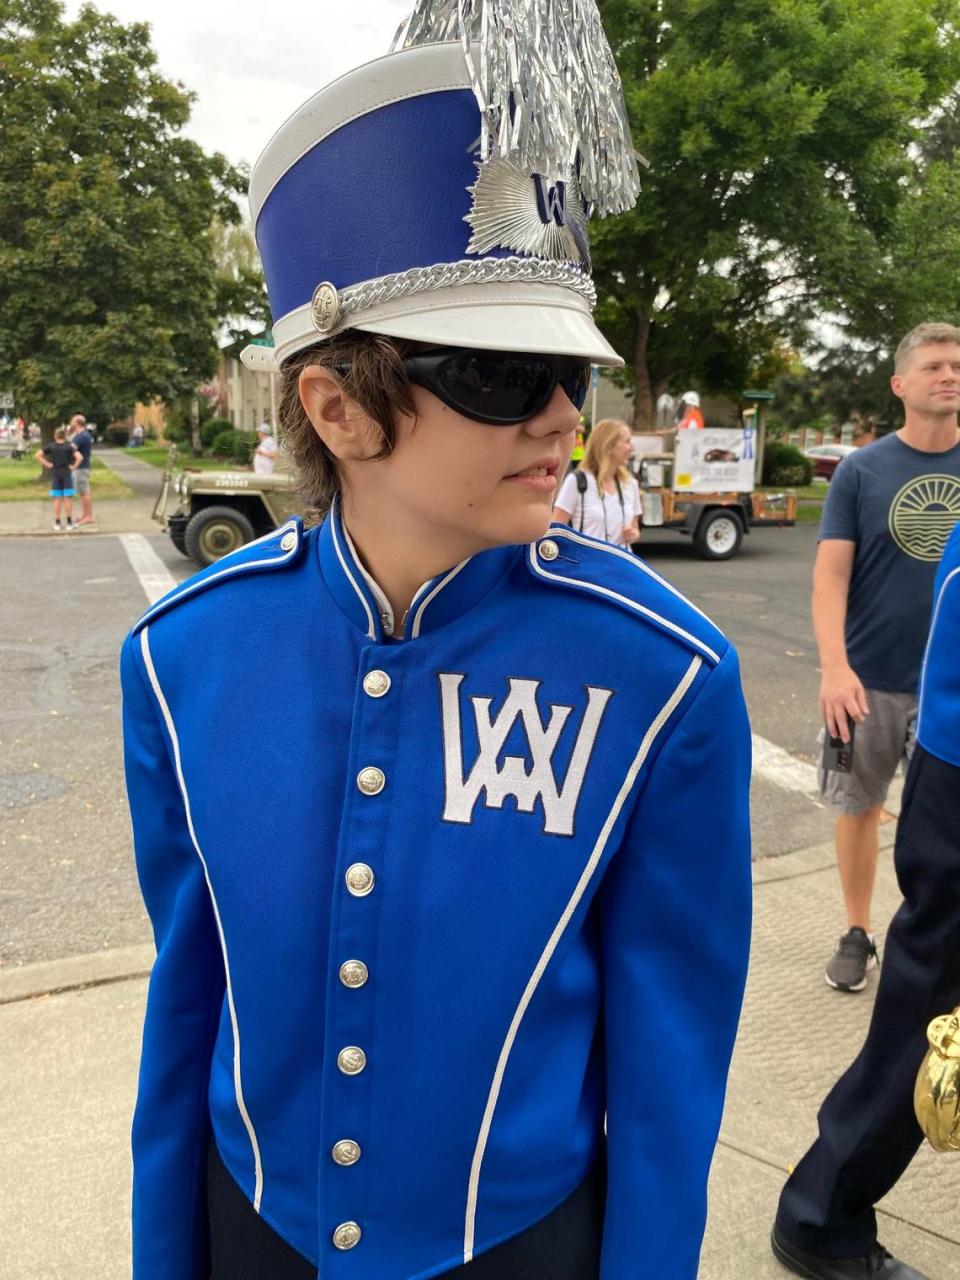 Aiden Moore-Van De Rostyne, 16, is part of the percussion section of a Walla Walla High School band. Experimental gene therapy has improved her vision.